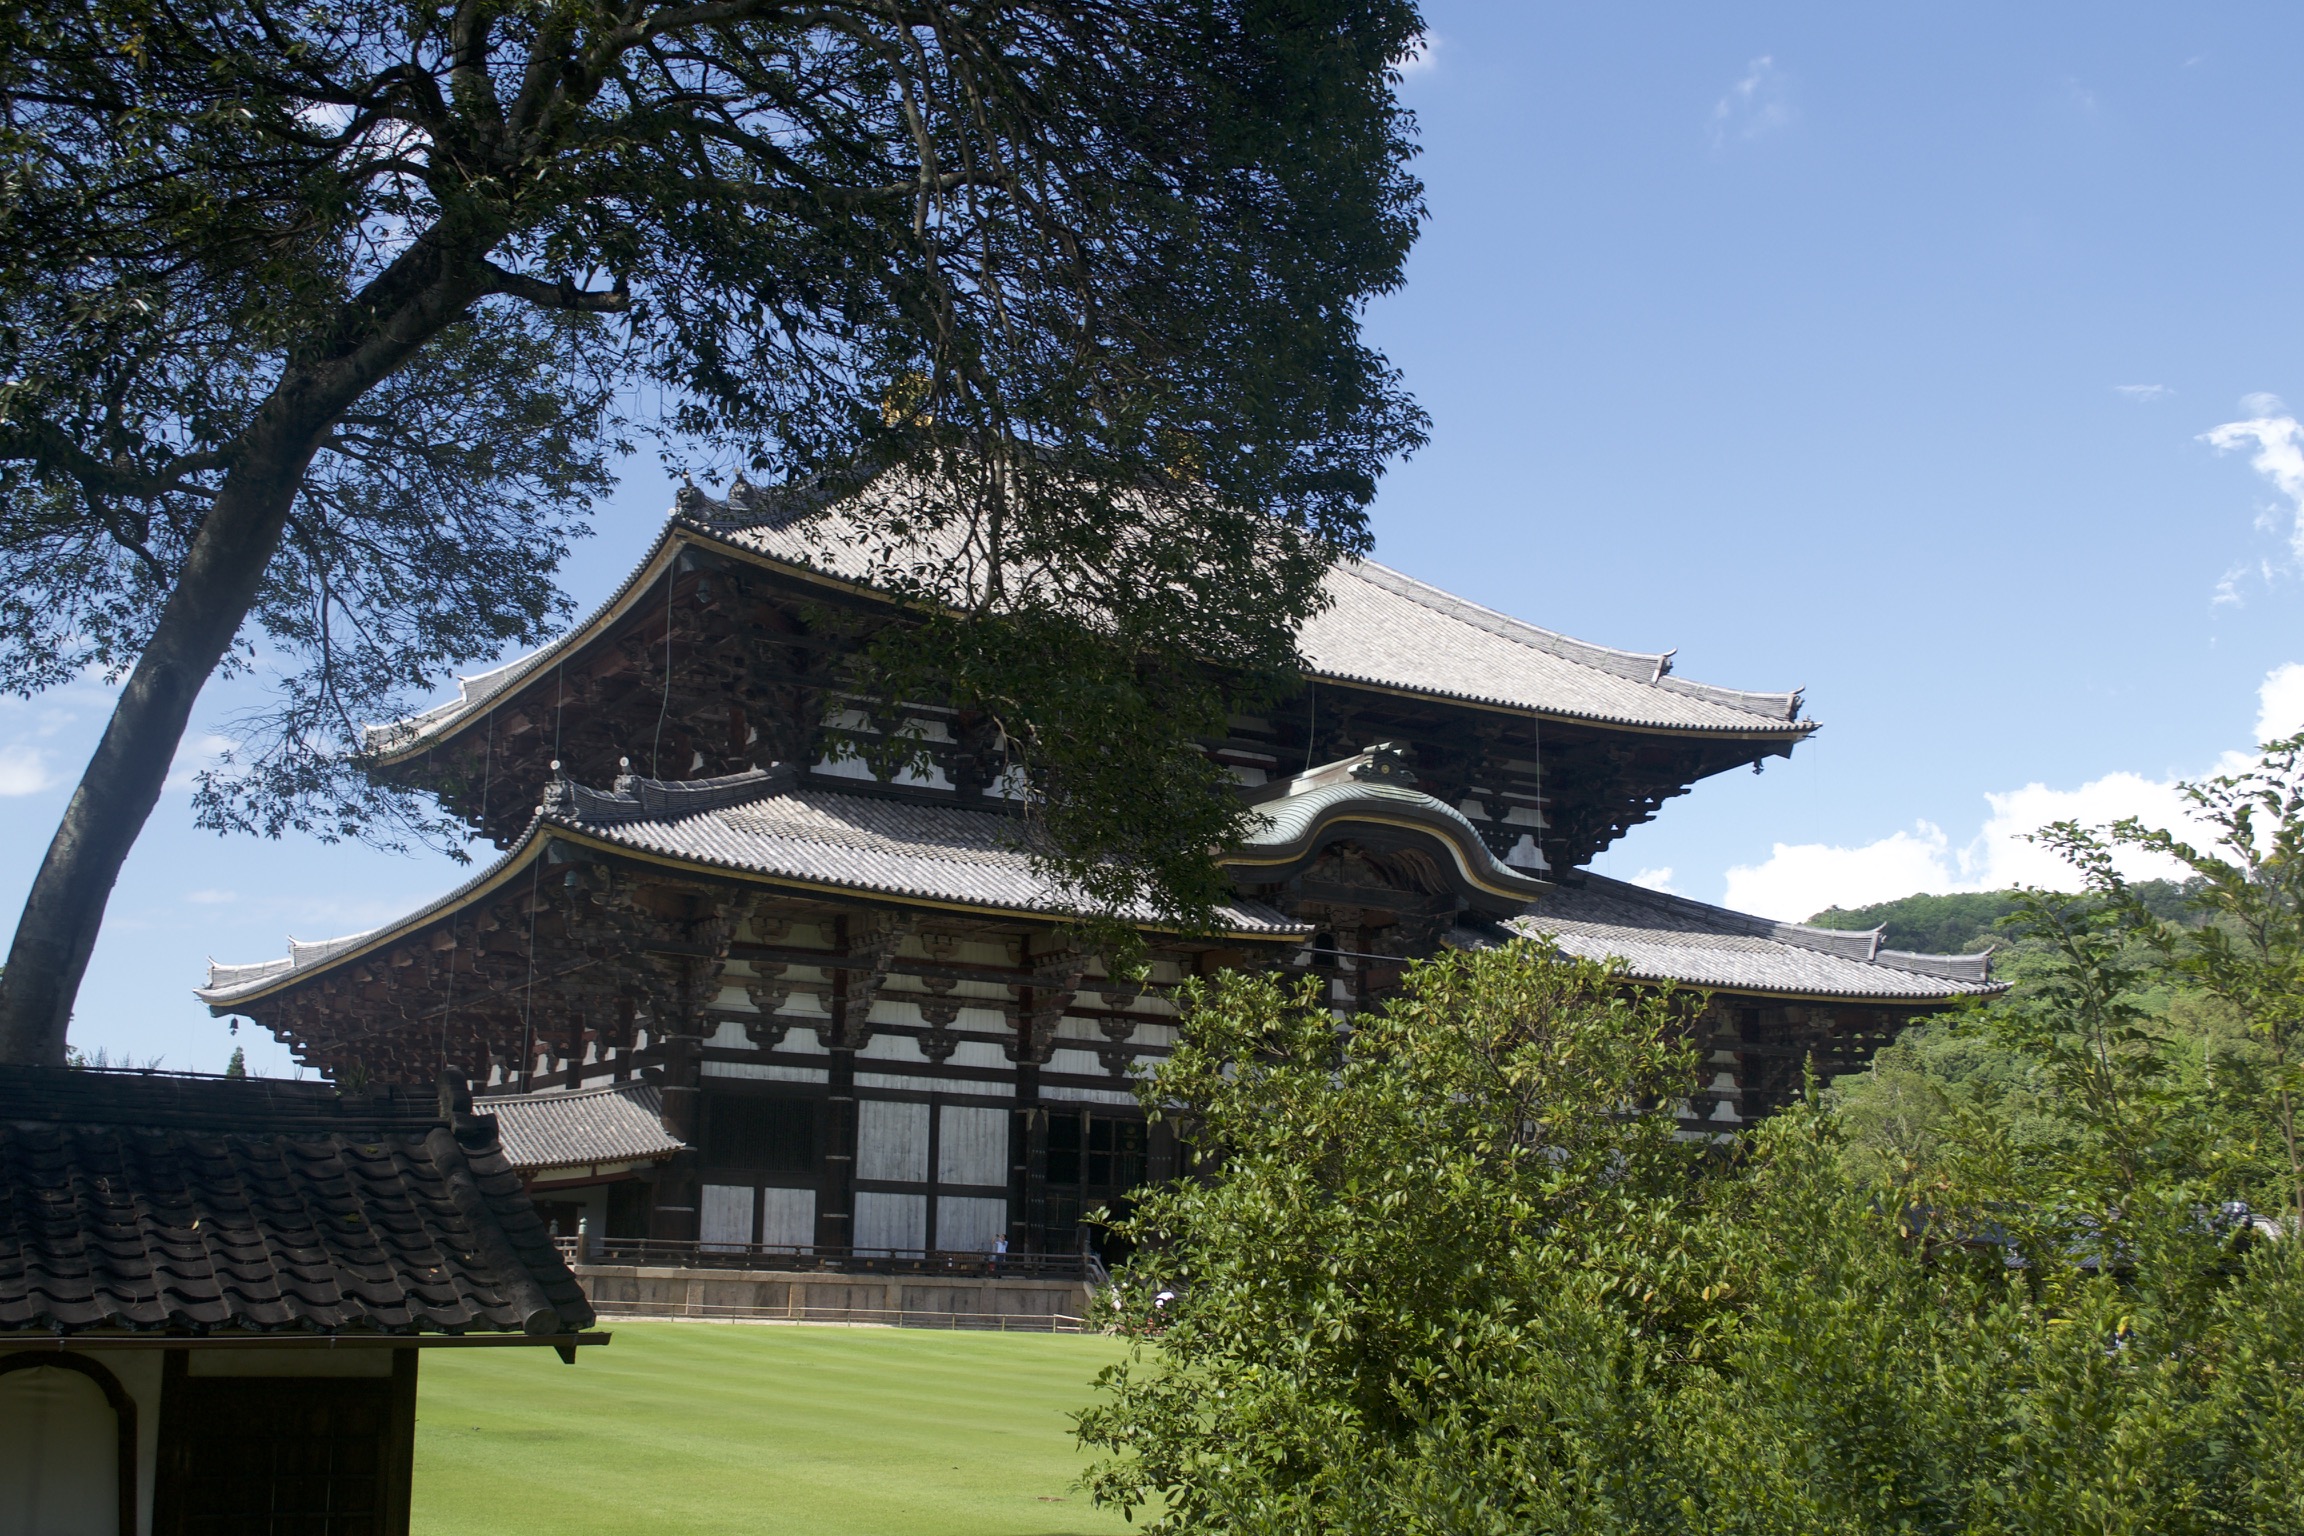 A huge Japanese building sits behind a perfect lawn.